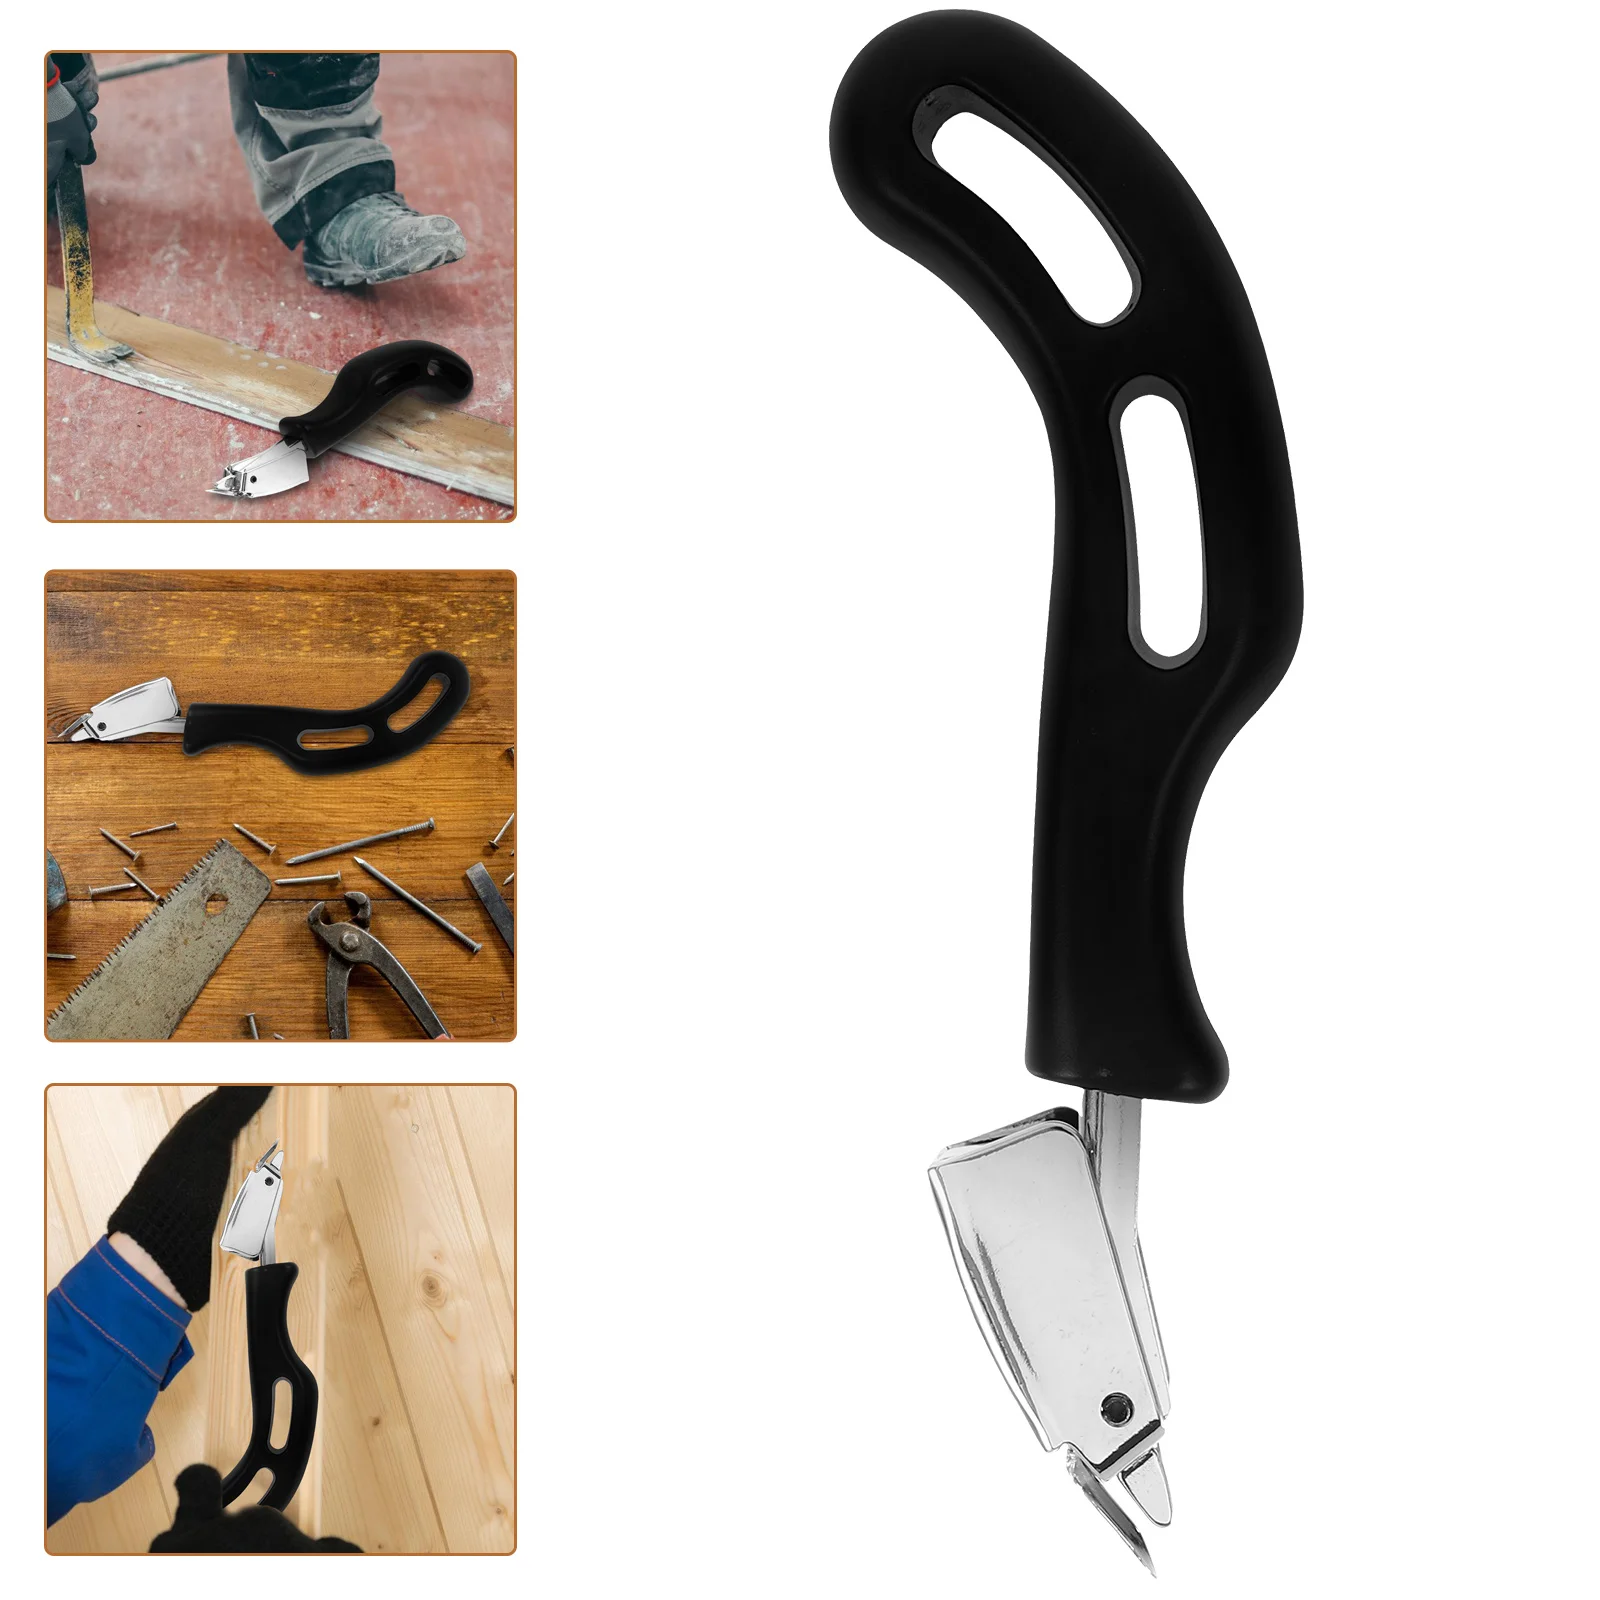 

Handheld Staple Remover Pullers Removers Heavy Duty Upholstery Tools Supplies Tack Staples Nails for Furniture Decor